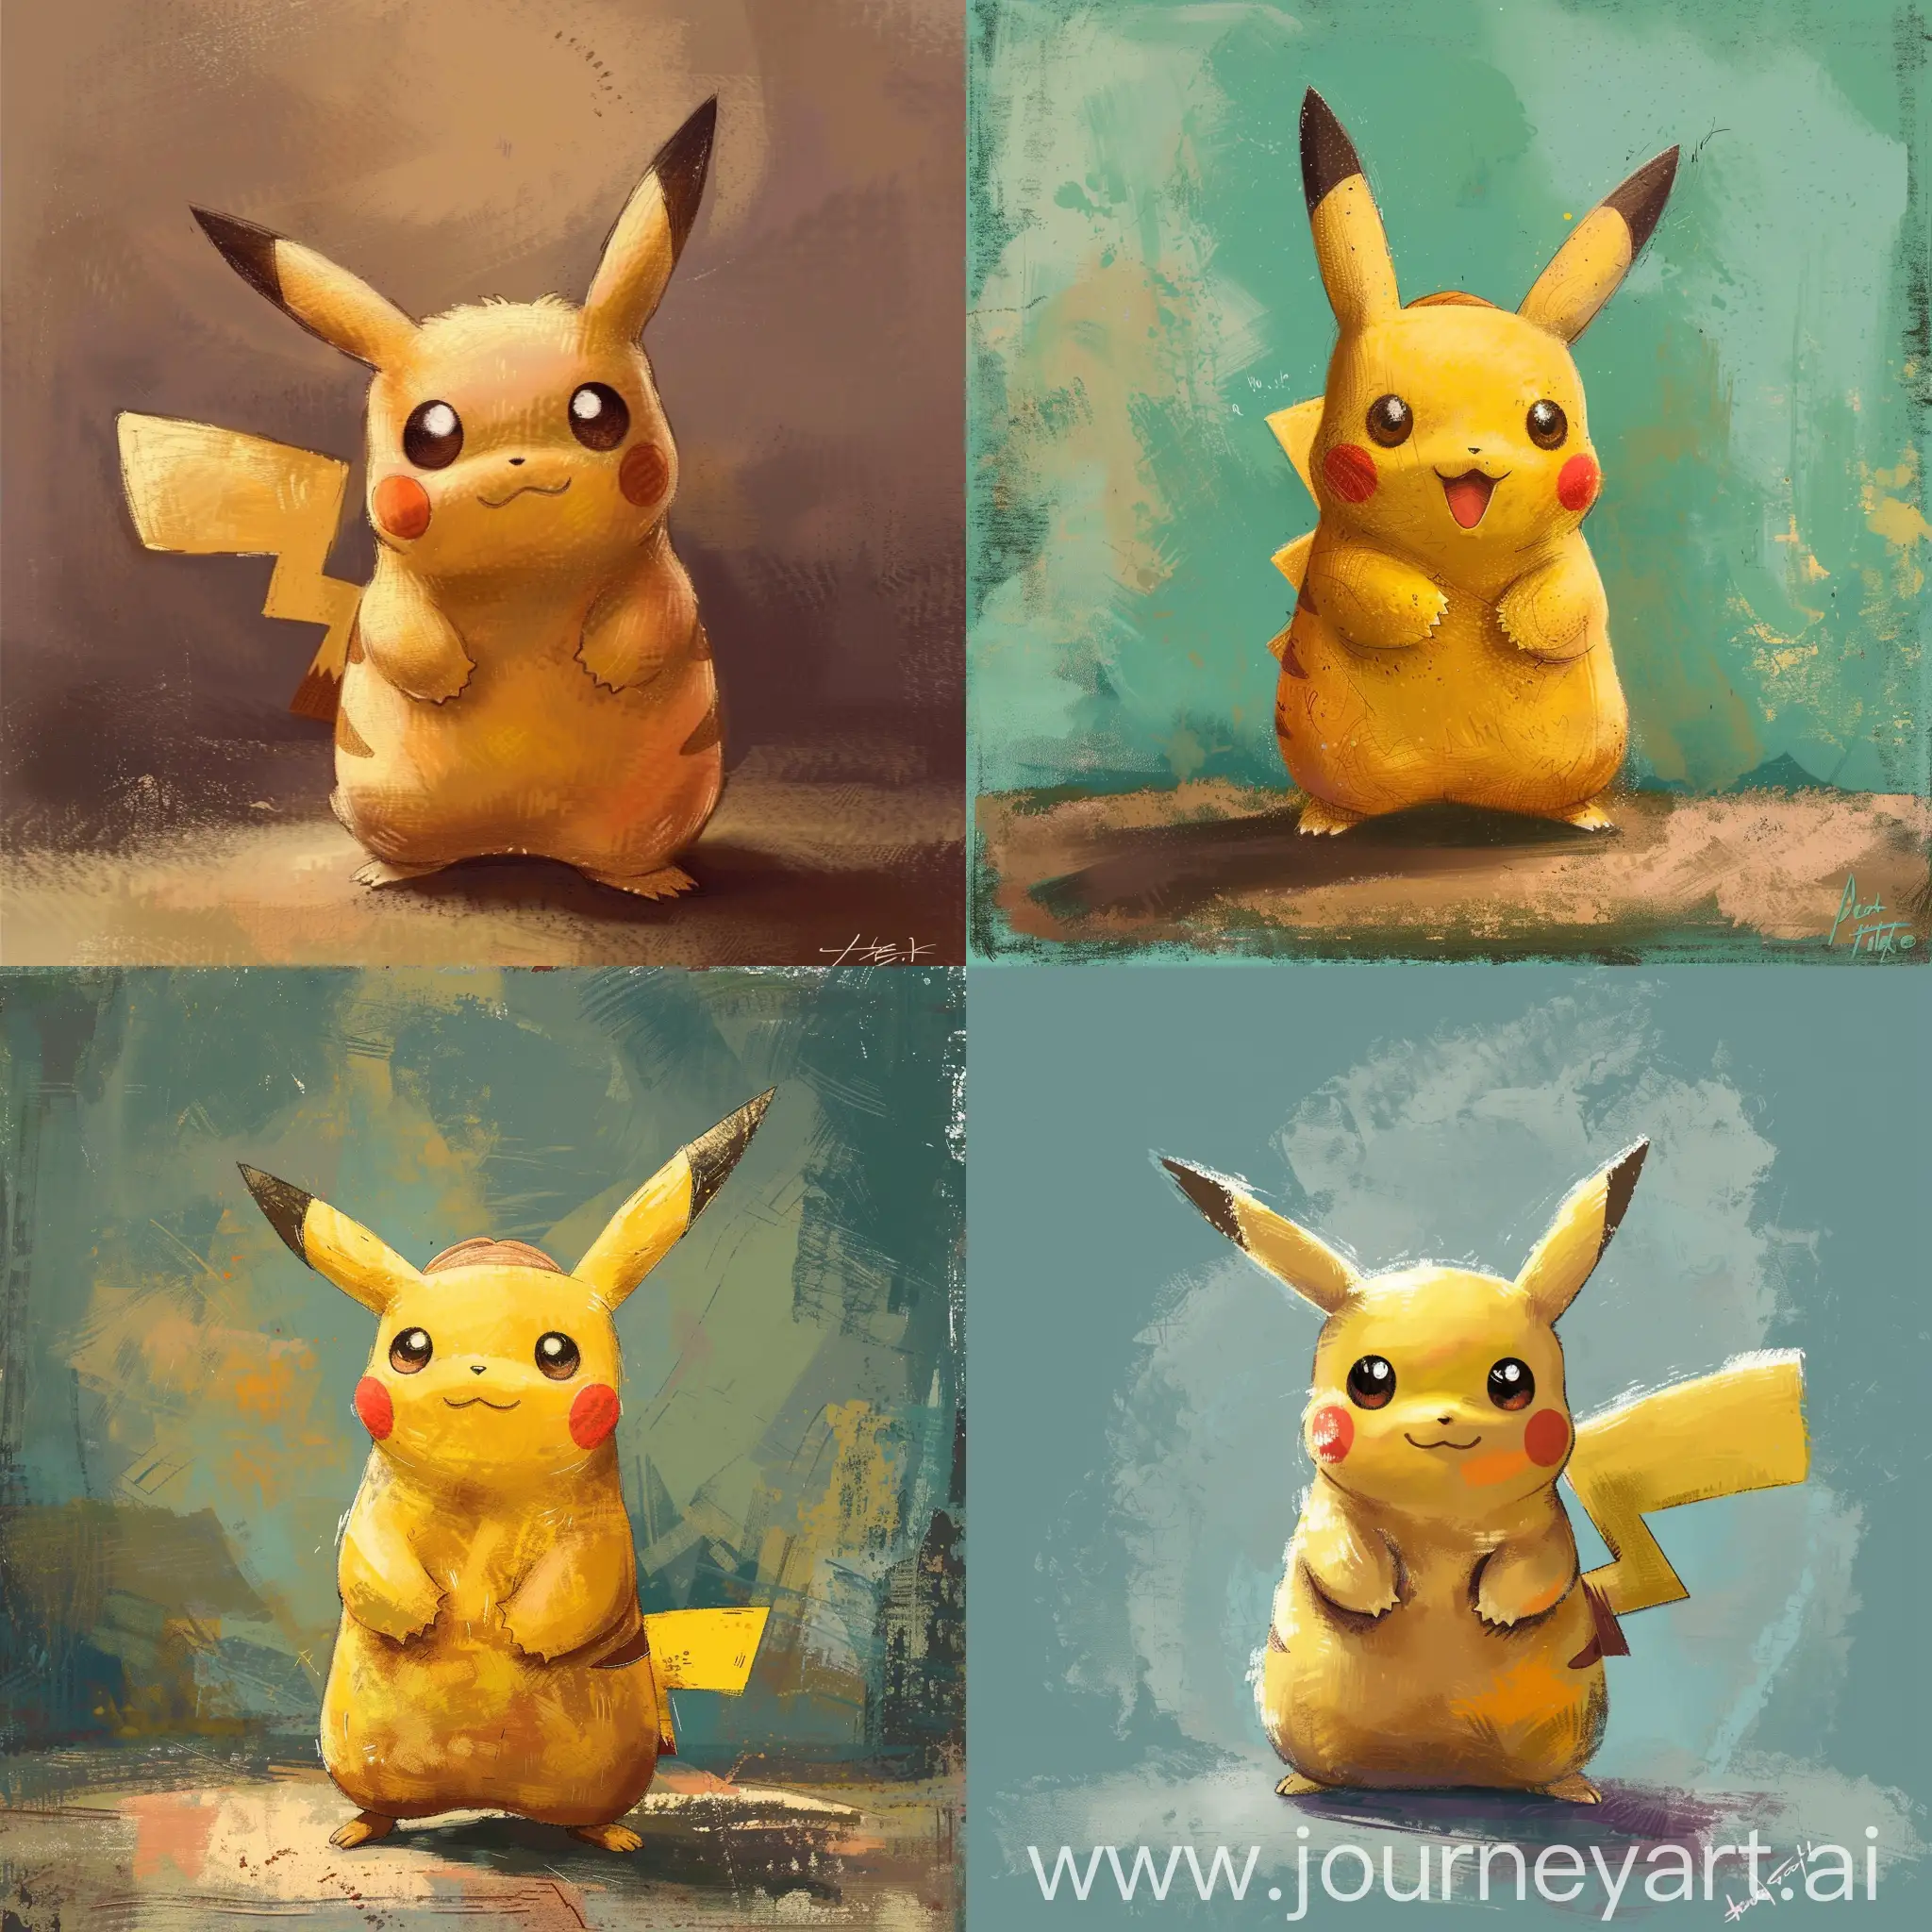 Pikachu-in-Pixar-Style-Adorable-Electric-Pokmon-Rendered-with-Pixars-Signature-Charm